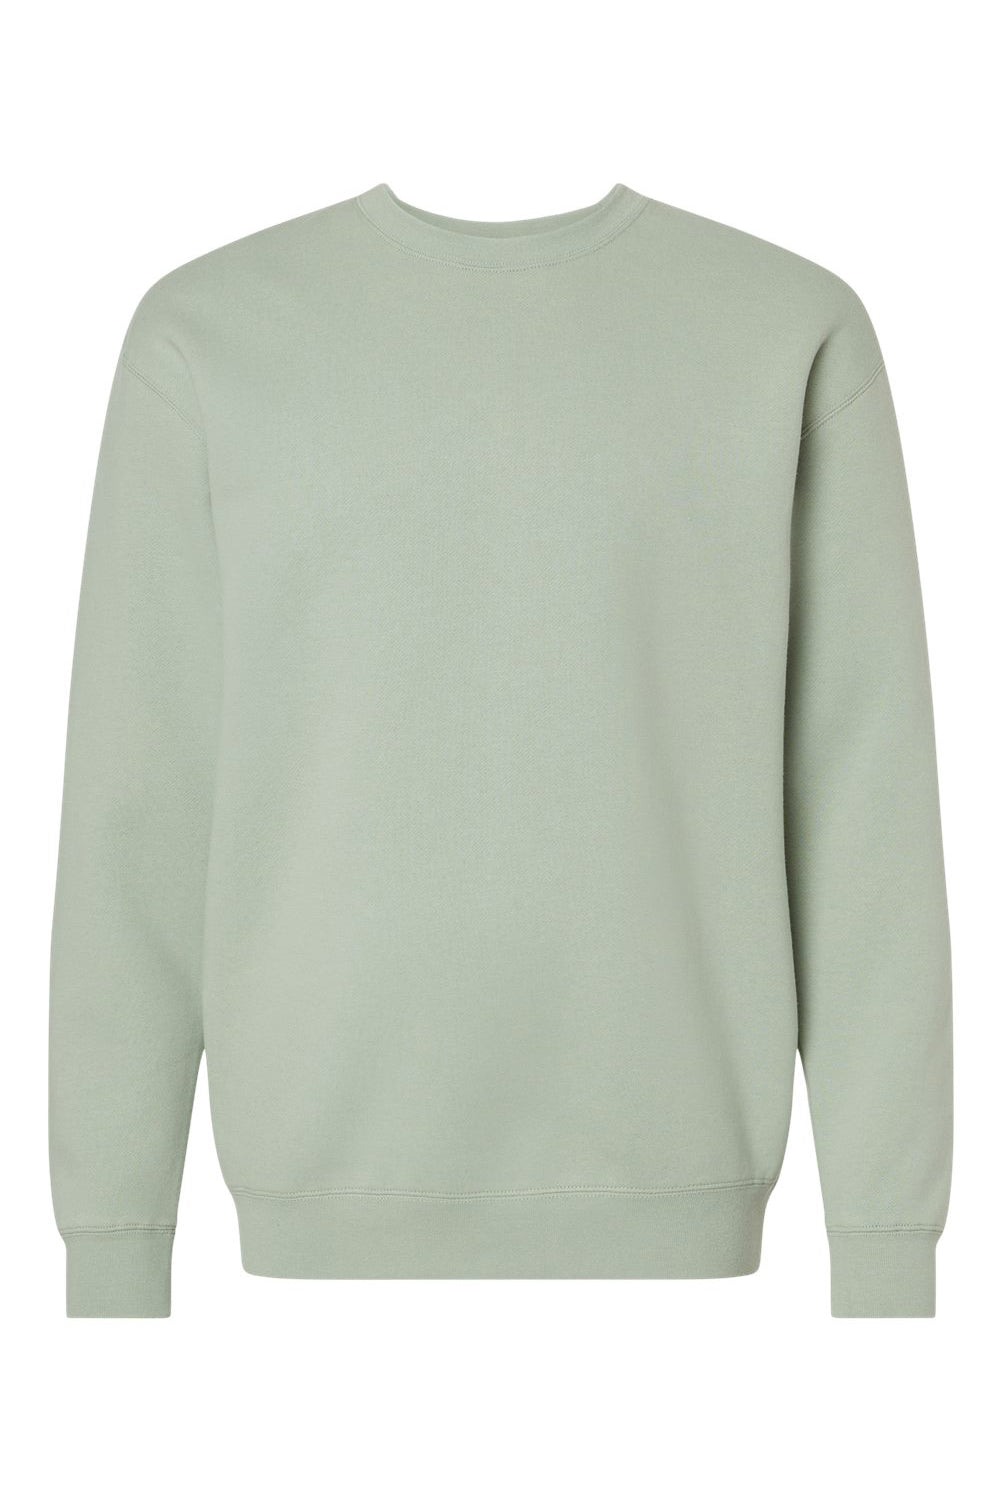 Independent Trading Co. IND3000 Mens Crewneck Sweatshirt Dusty Sage Green Flat Front